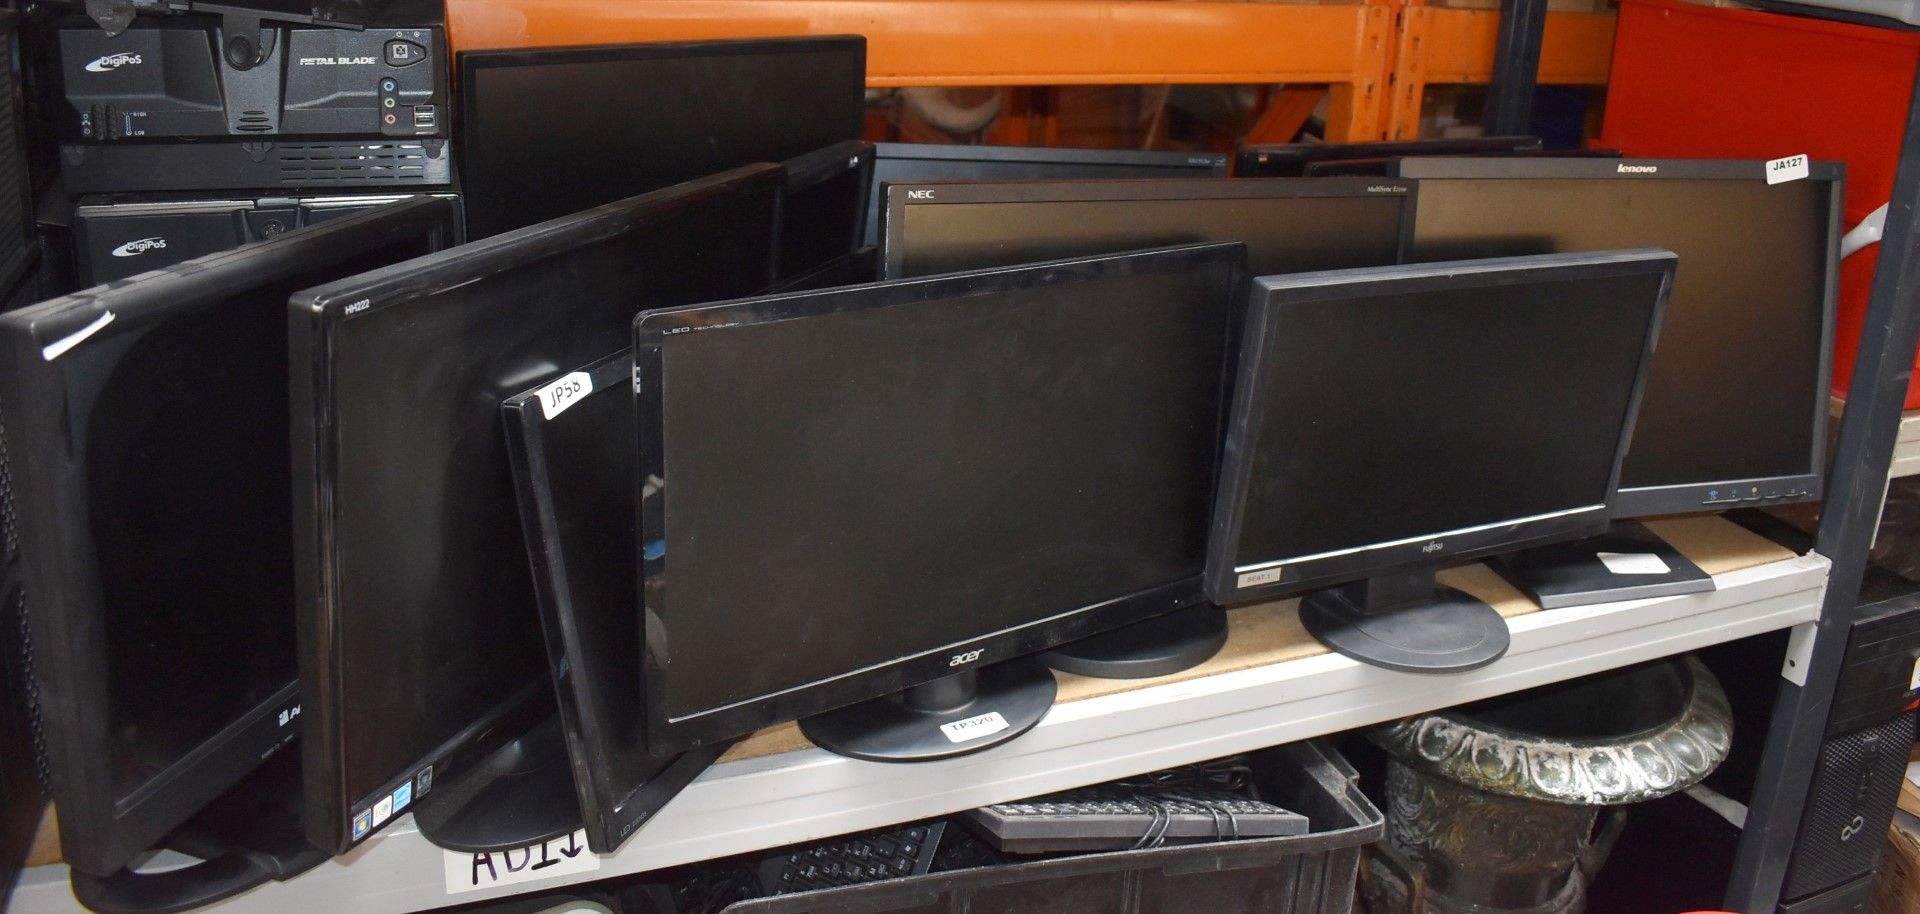 14 x Various Flat Screen Computer Monitors - Various Sizes Included - Removed From Various Office